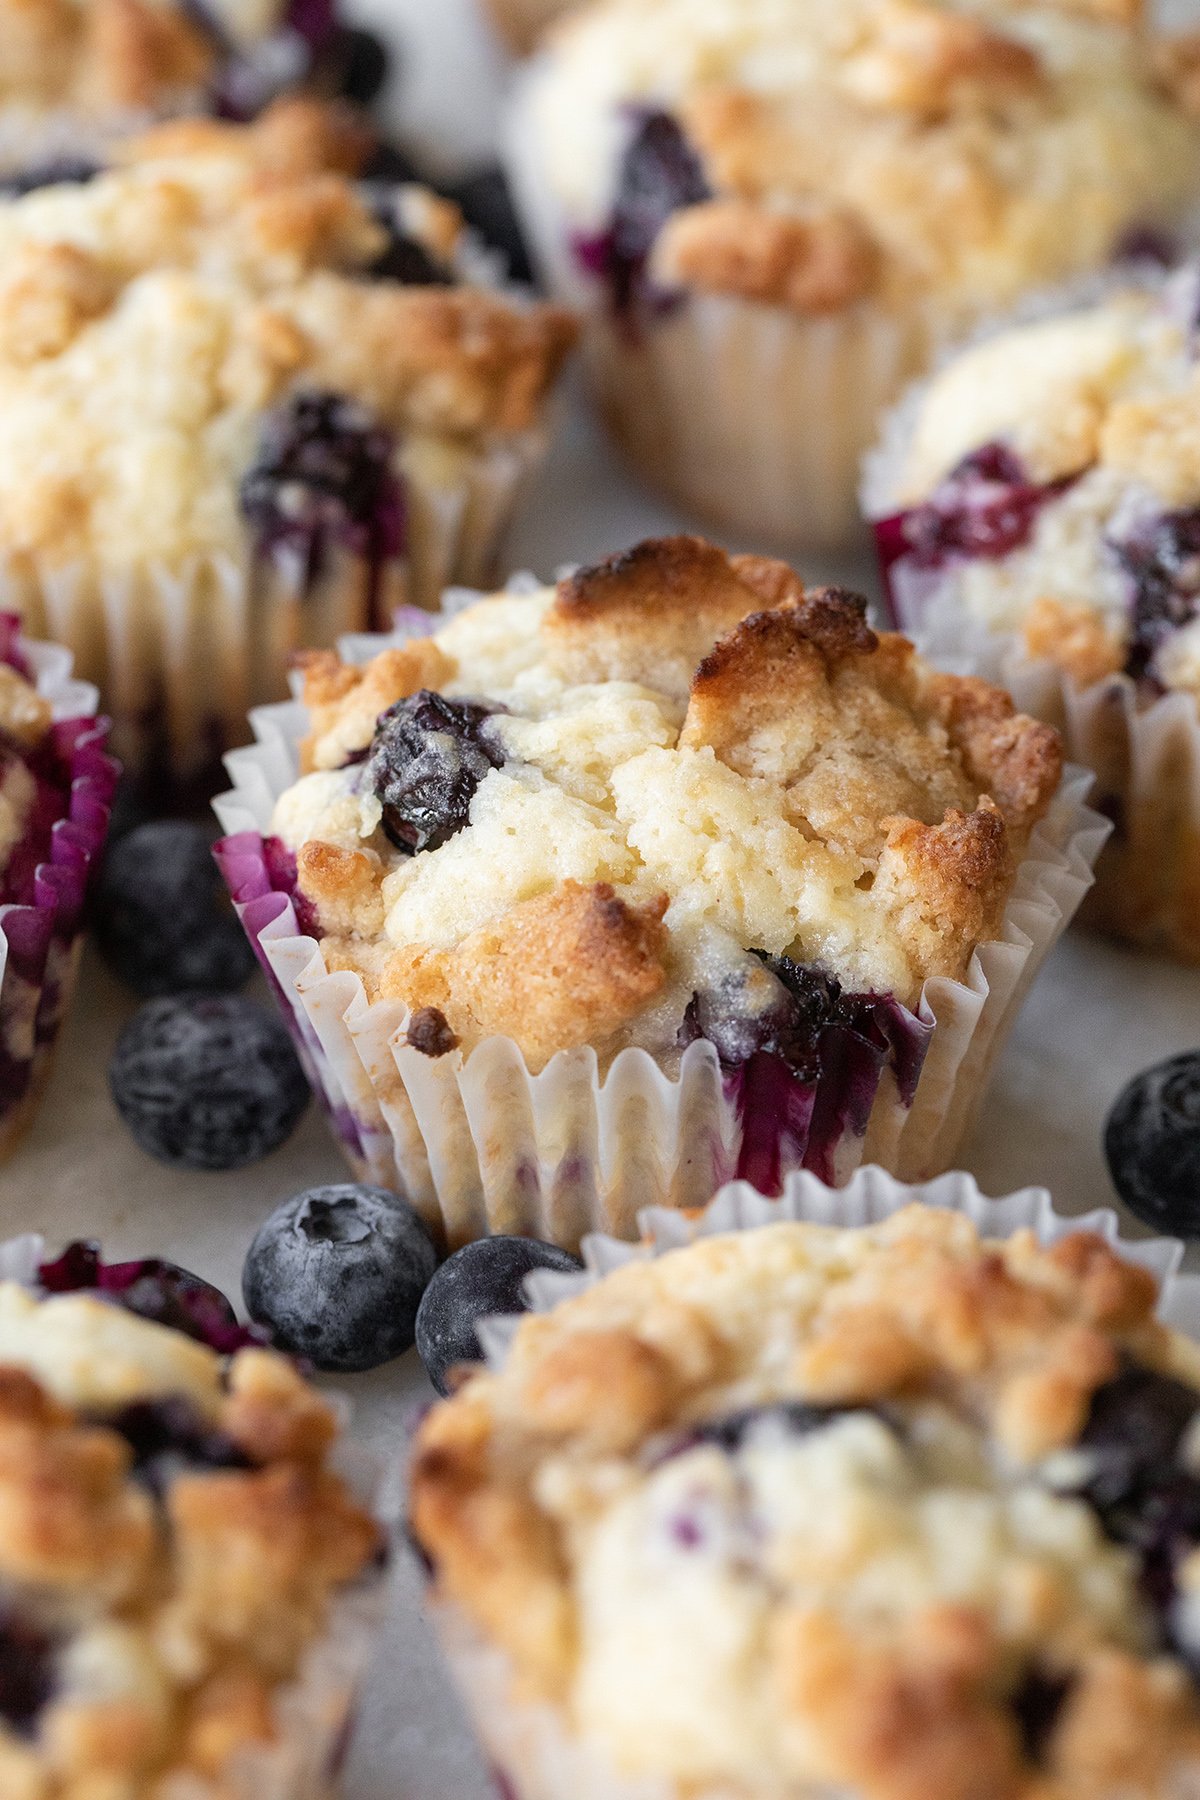 Healthy blueberry banana muffins.